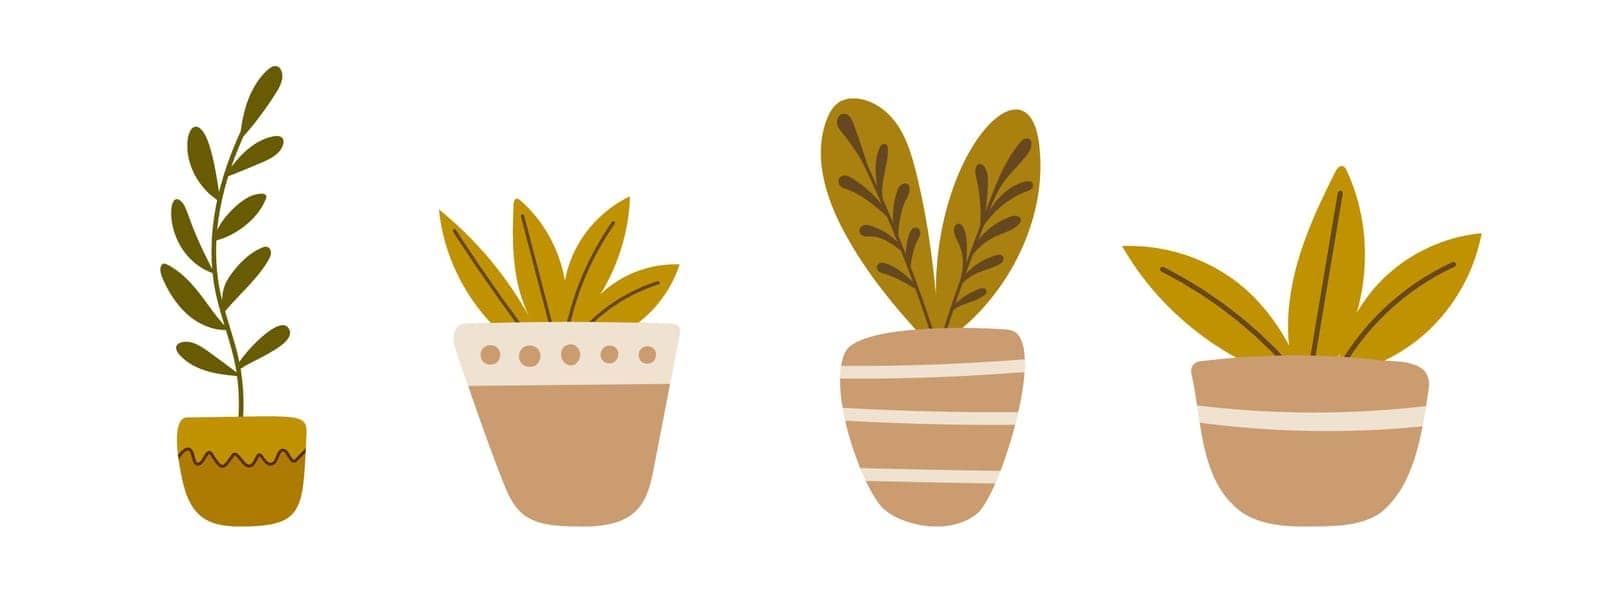 Set of hand drawn potted plants. Home decor, cozy plant. Vector stock illustration by Melnyk